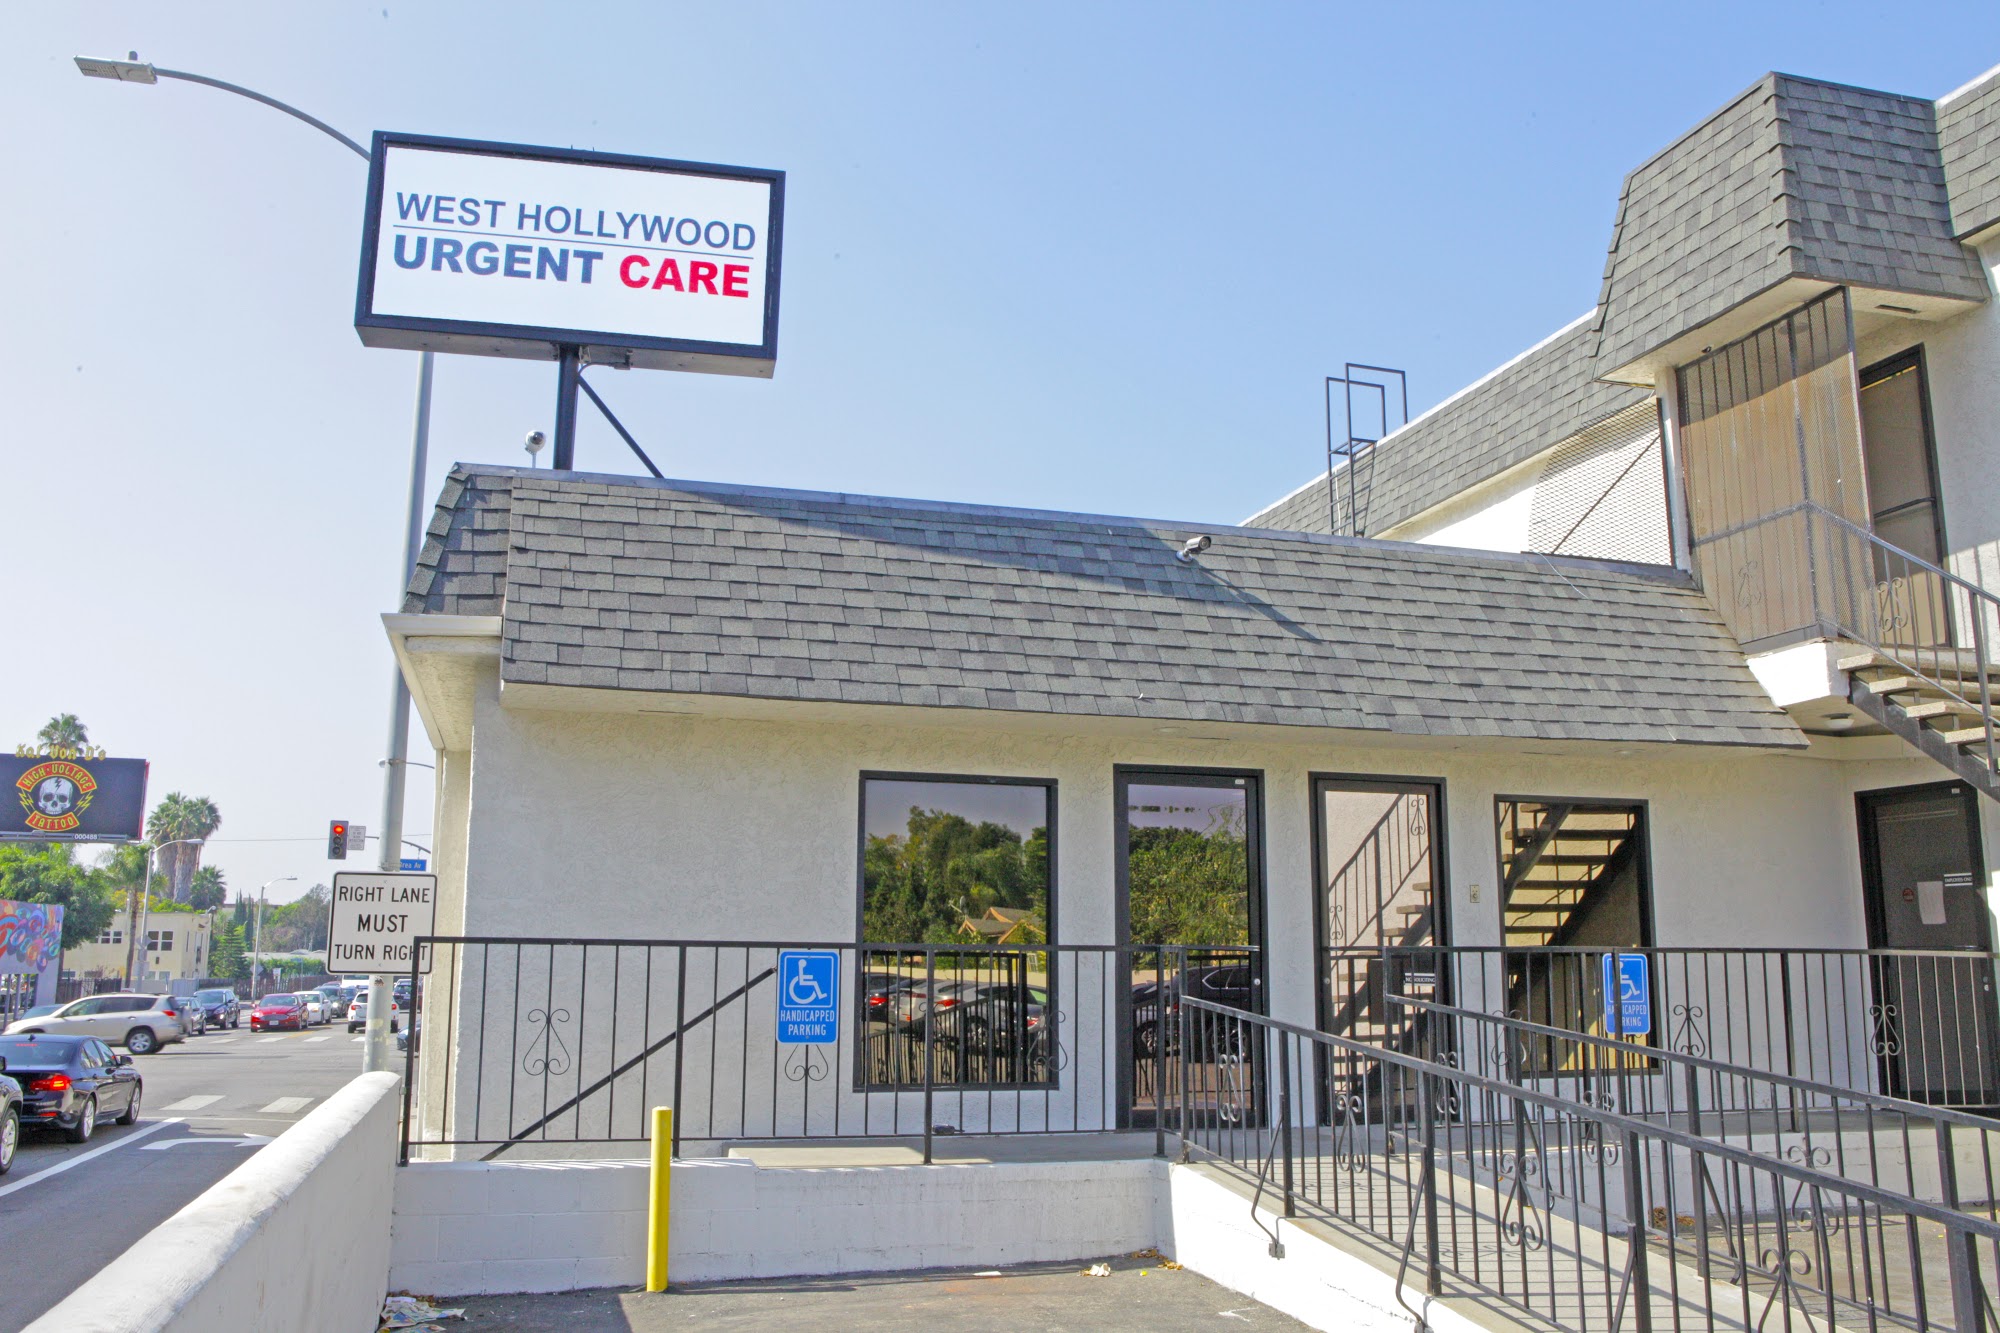 West Hollywood Urgent Care